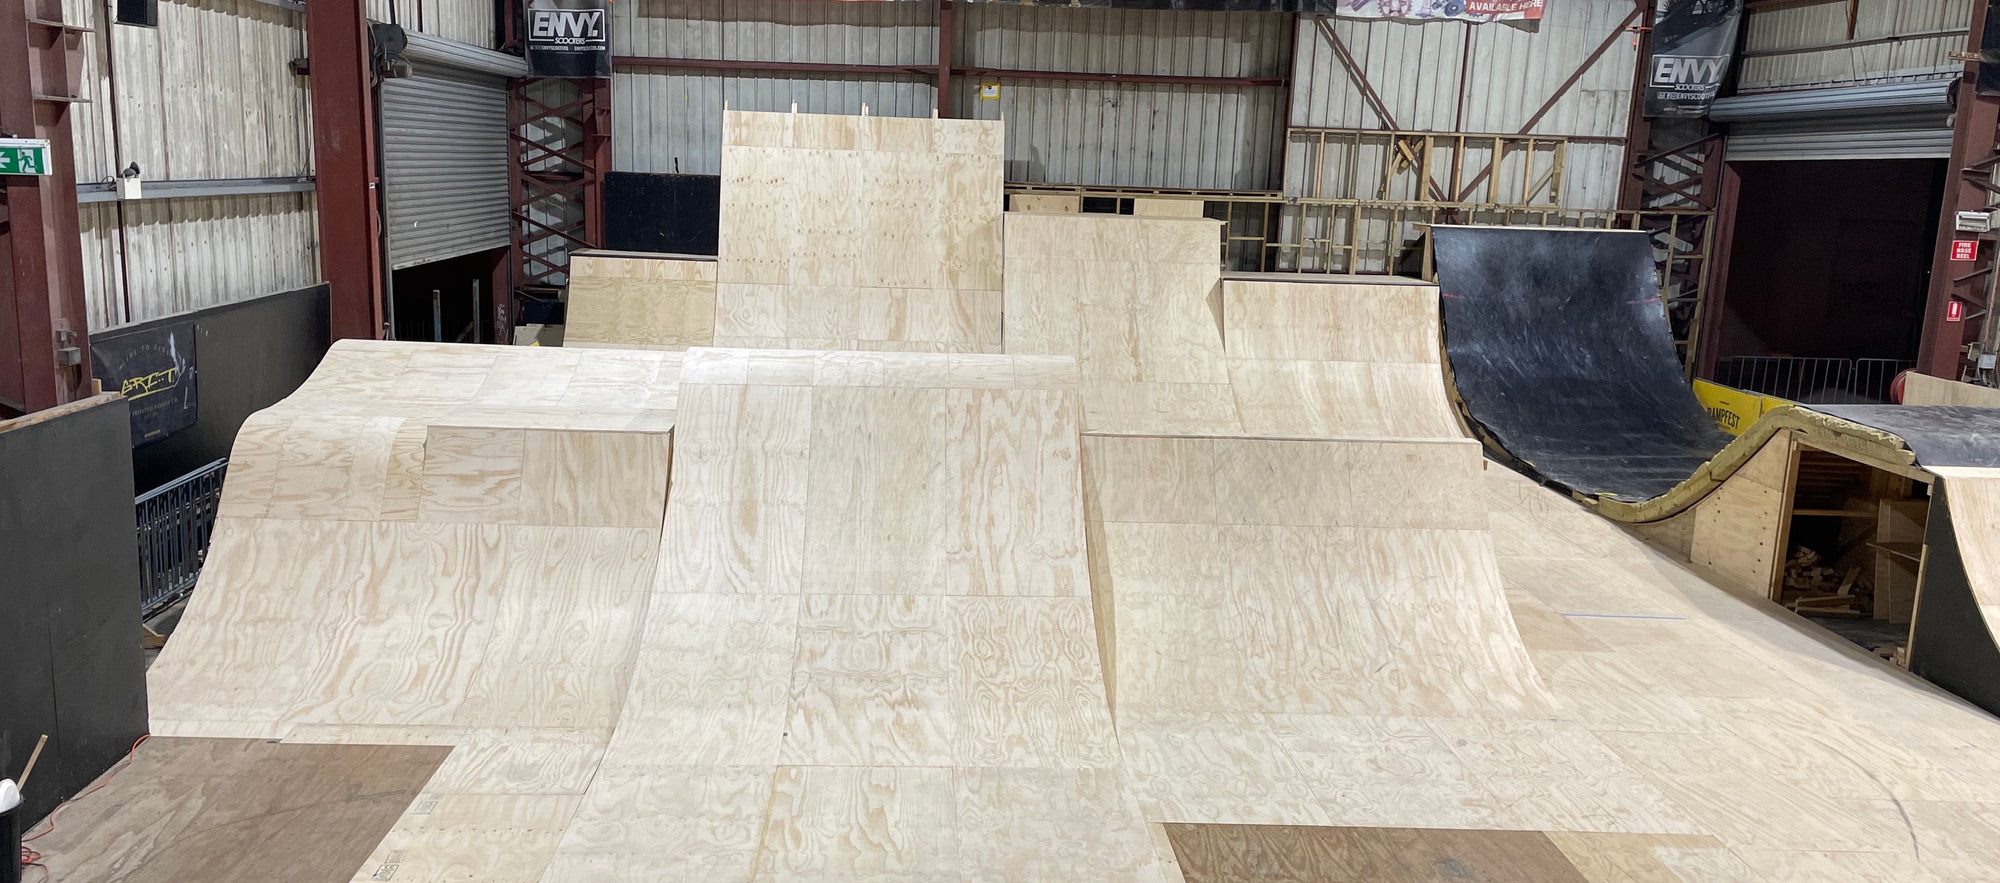 RampFest is Back - New Park OPEN & Ready to ride!